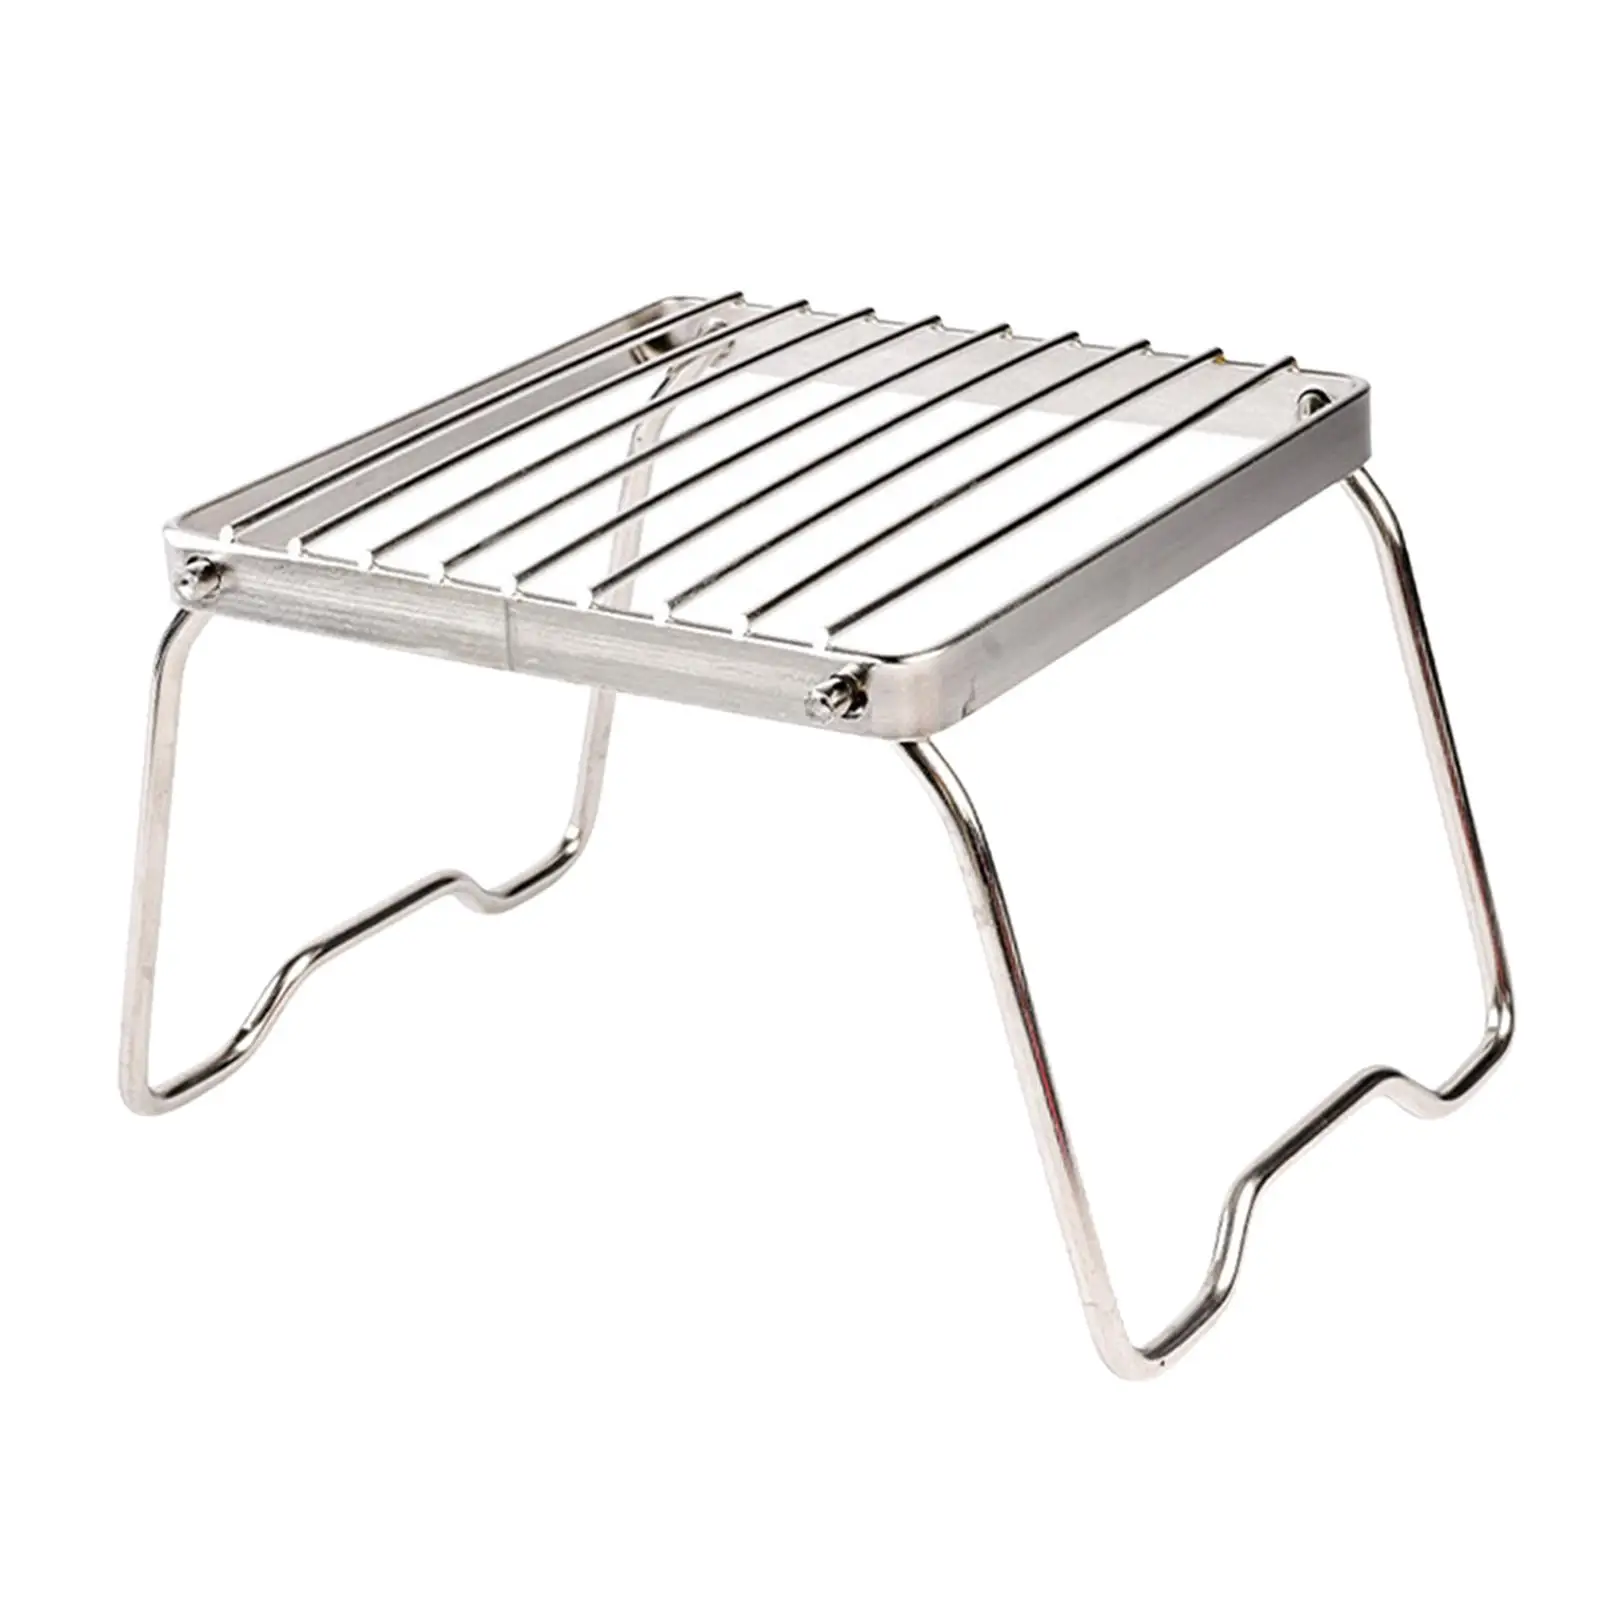 Folding Campfire Grill No Need Installation Cookware Roasting Rack Burner Support for Backyard Outdoor Camping Cooking Travel